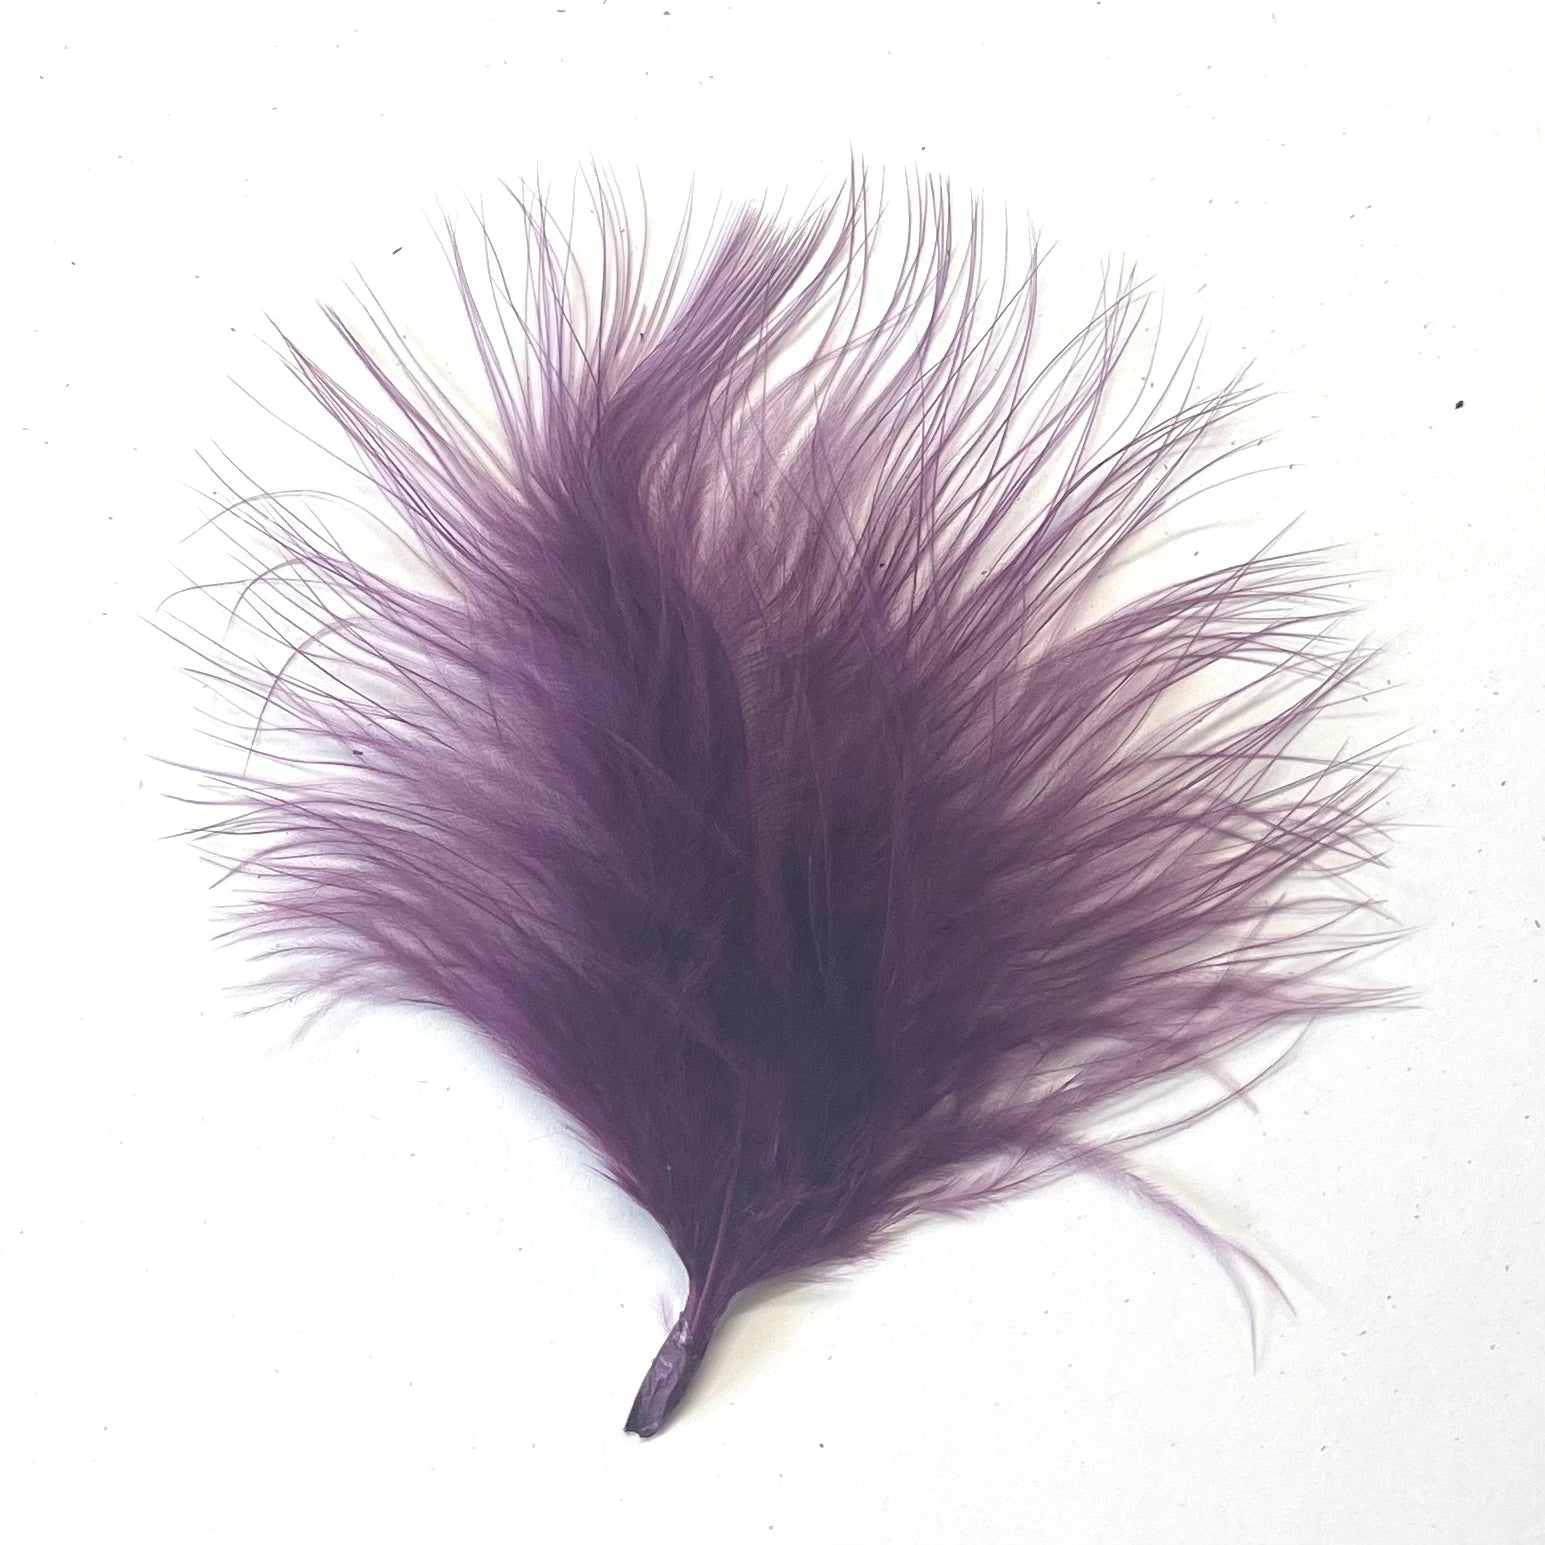 Itty Bitty Marabou Feather Plumage Pack 10 grams - Eggplant